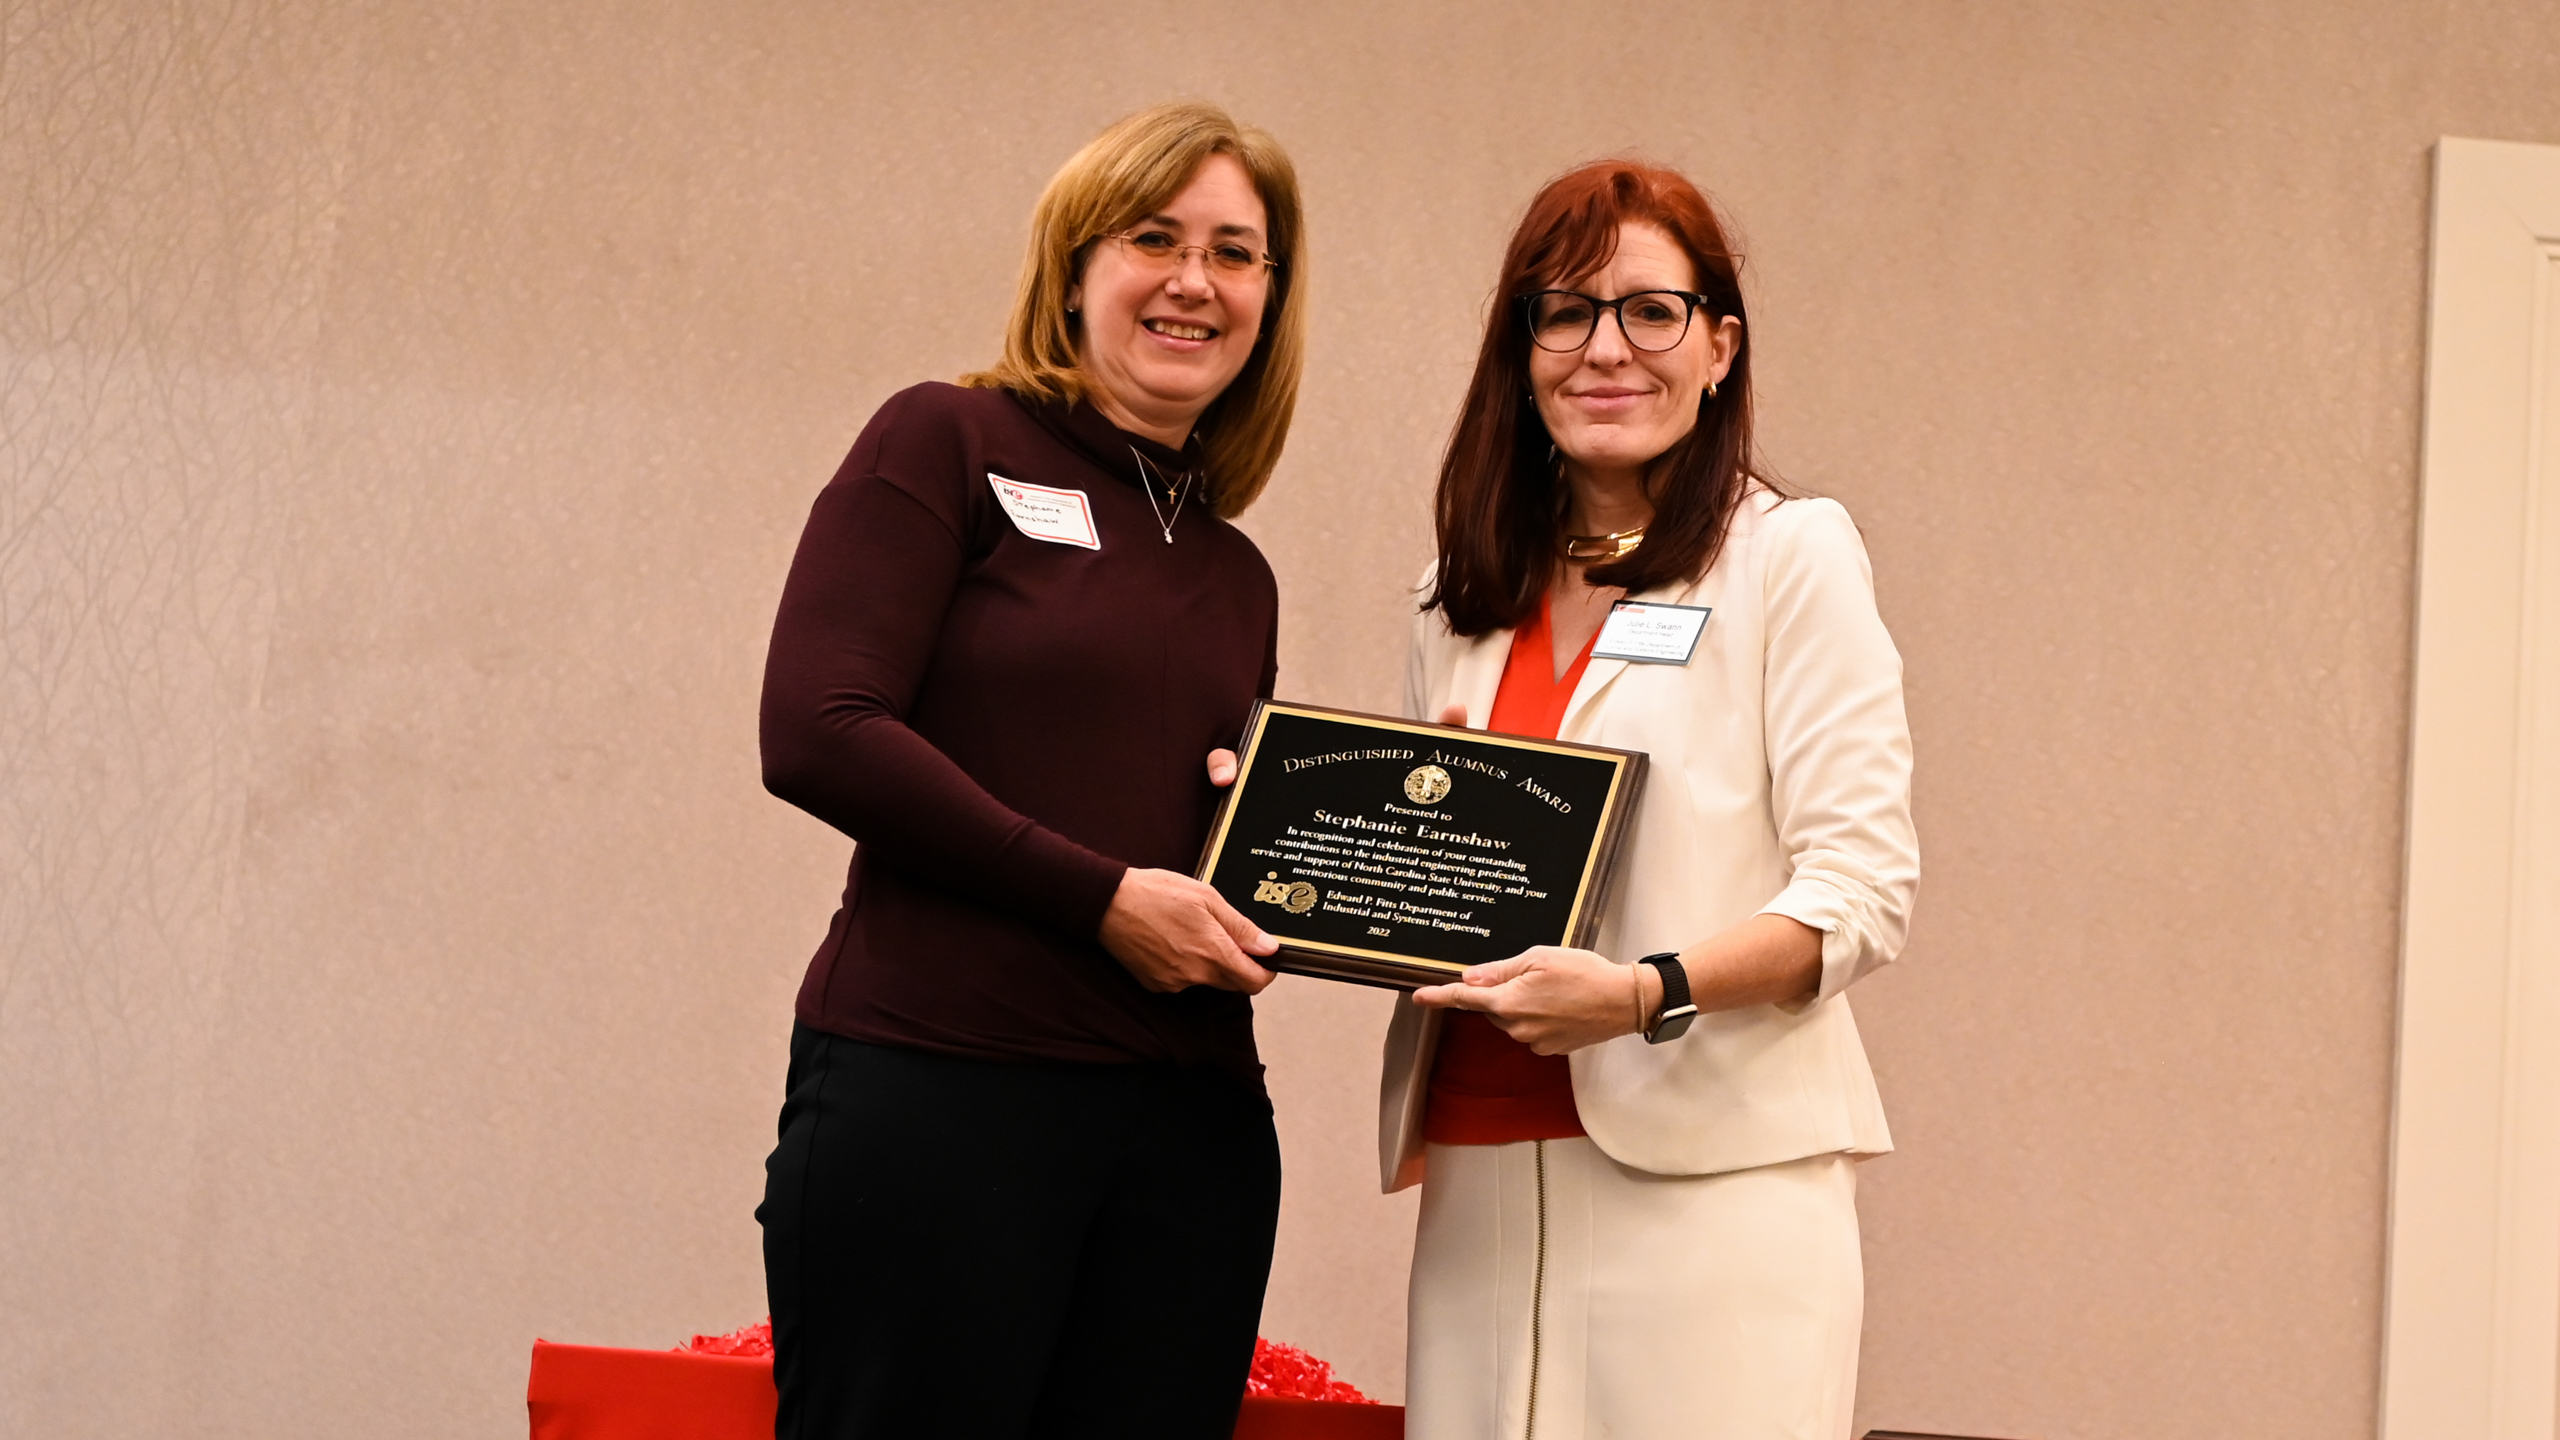 Distinguished Alumna Dr. Stephanie Earnshaw accepting her award from Dr. Julie Swann